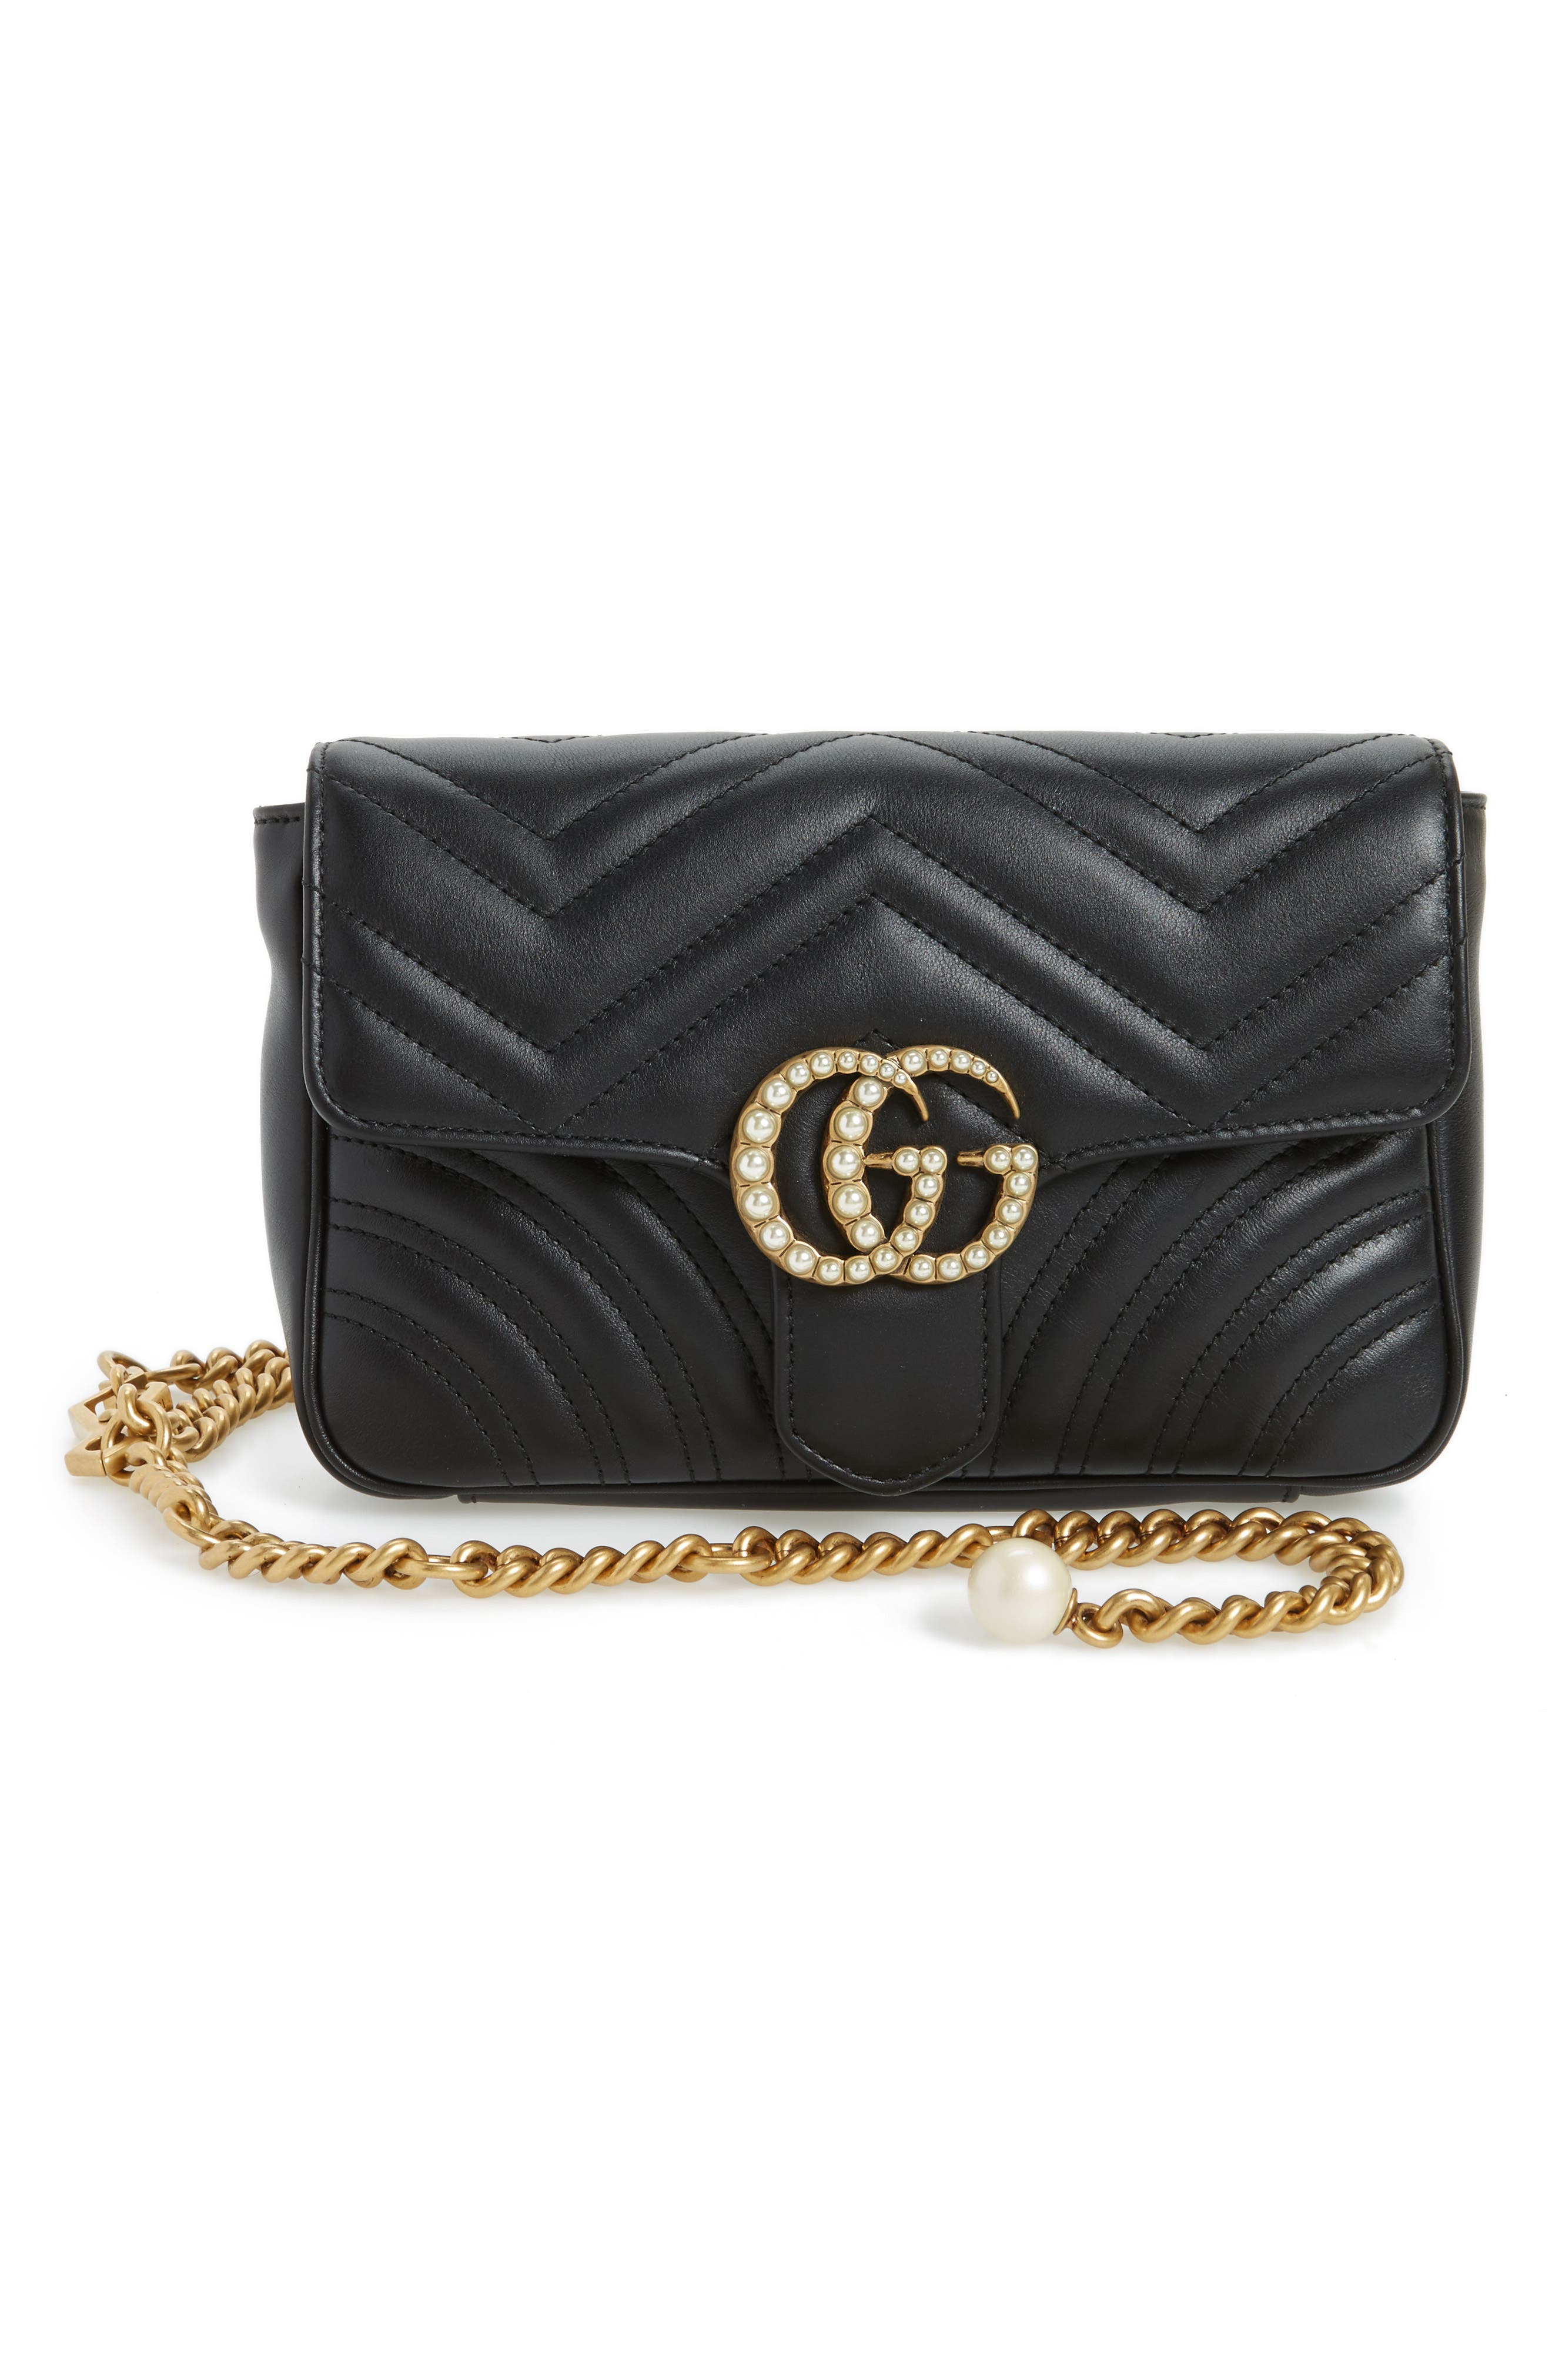 gucci purse with pearls